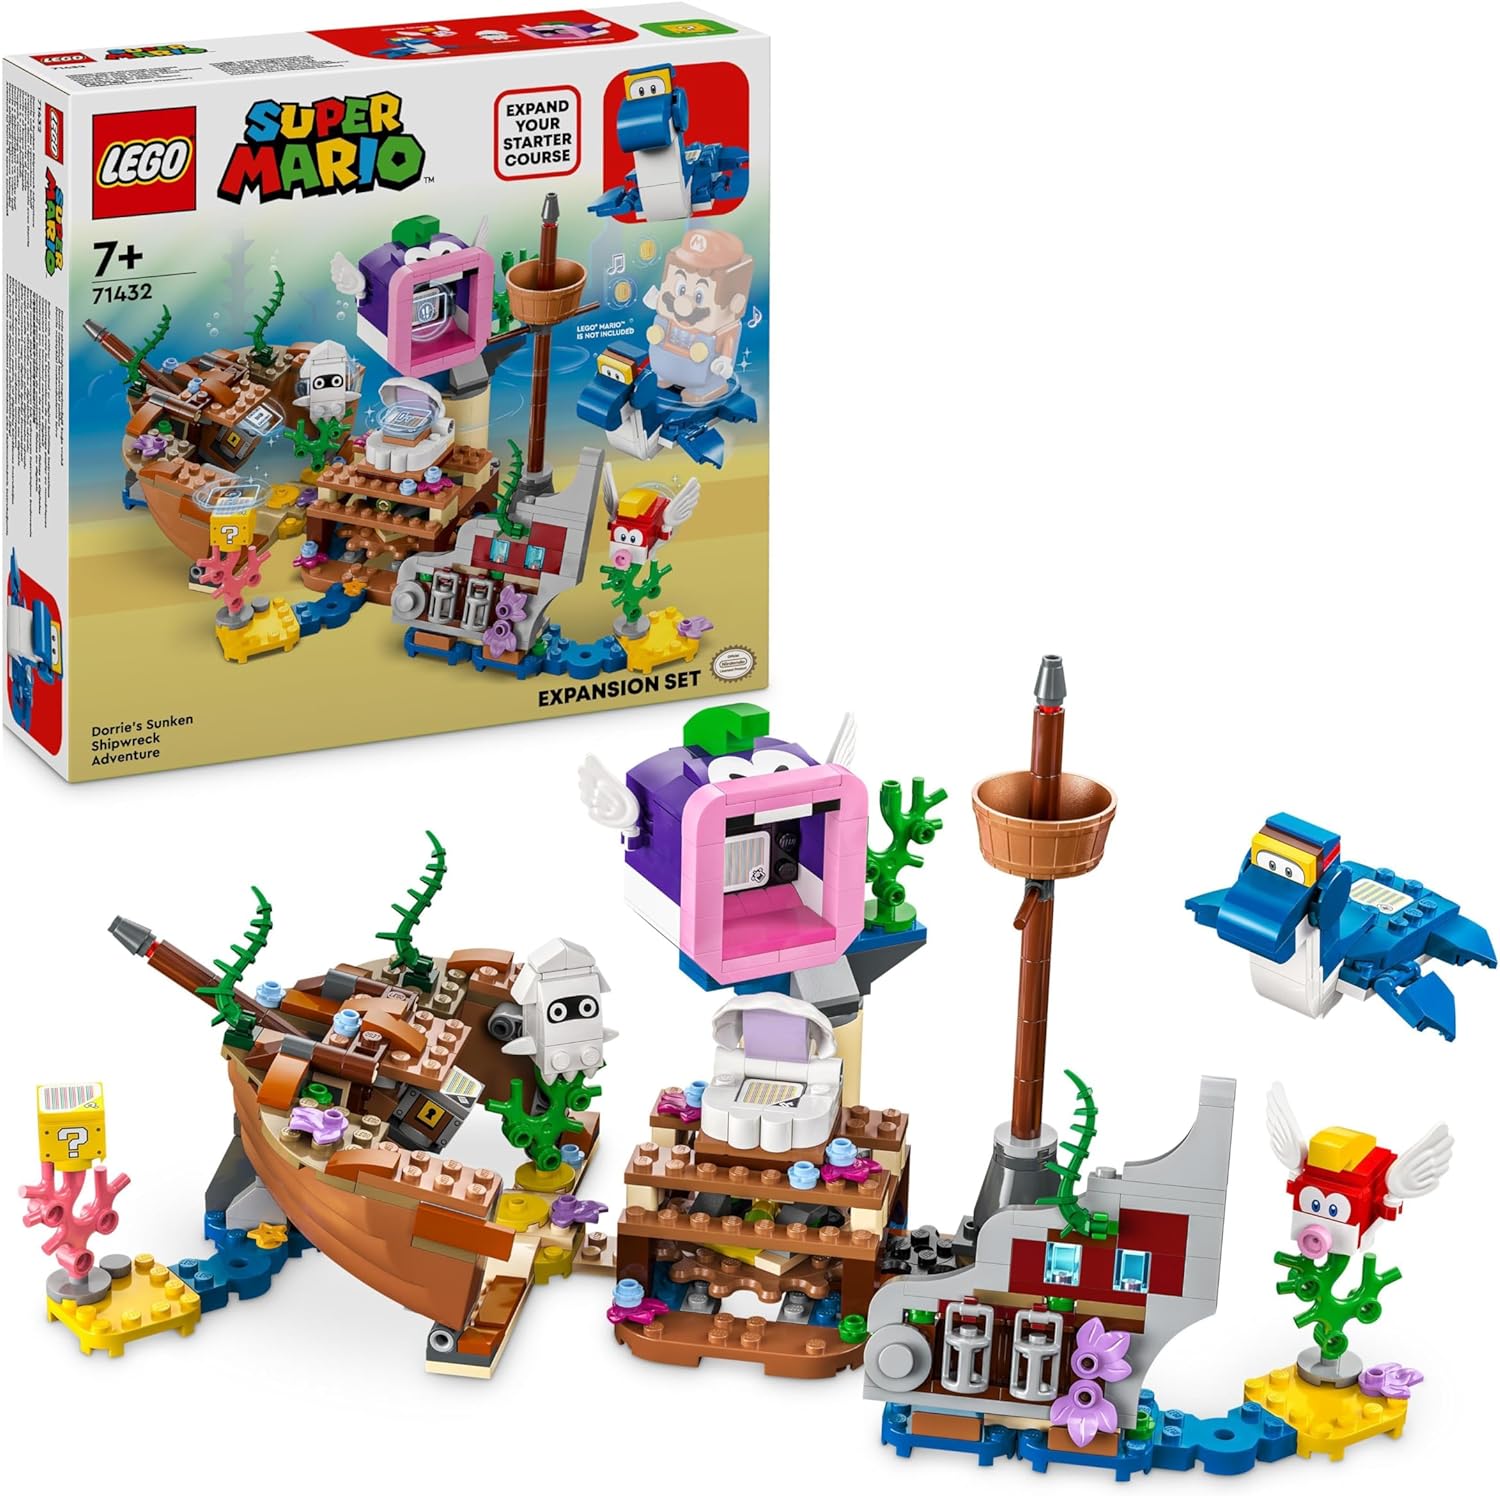 LEGO Super Mario Dorrie and the Sunken Ship - Expansion Set, Toy with Figures Including Cheep-Cheep, Happ-Cheep and Blooper, Gamer Gift for Boys, Girls and Gamers from 7 Years 71432